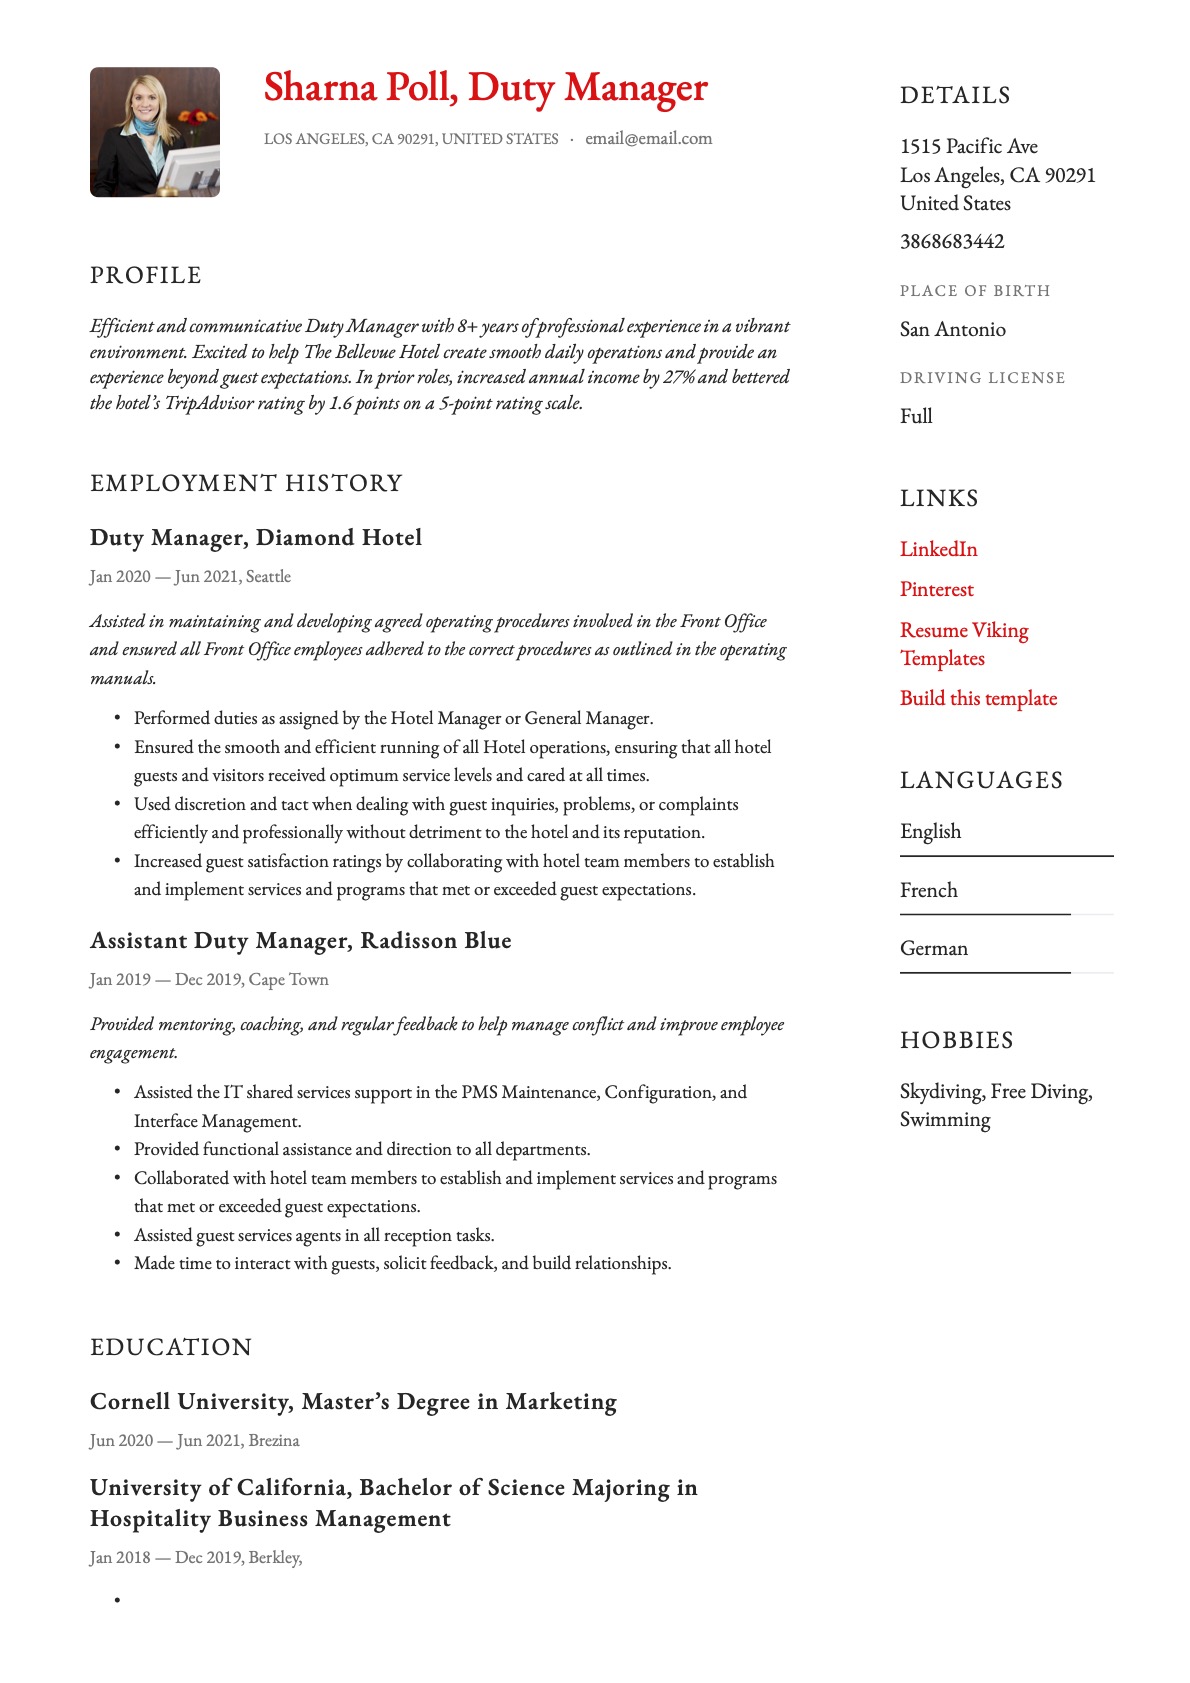 Duty Manager Resume Template